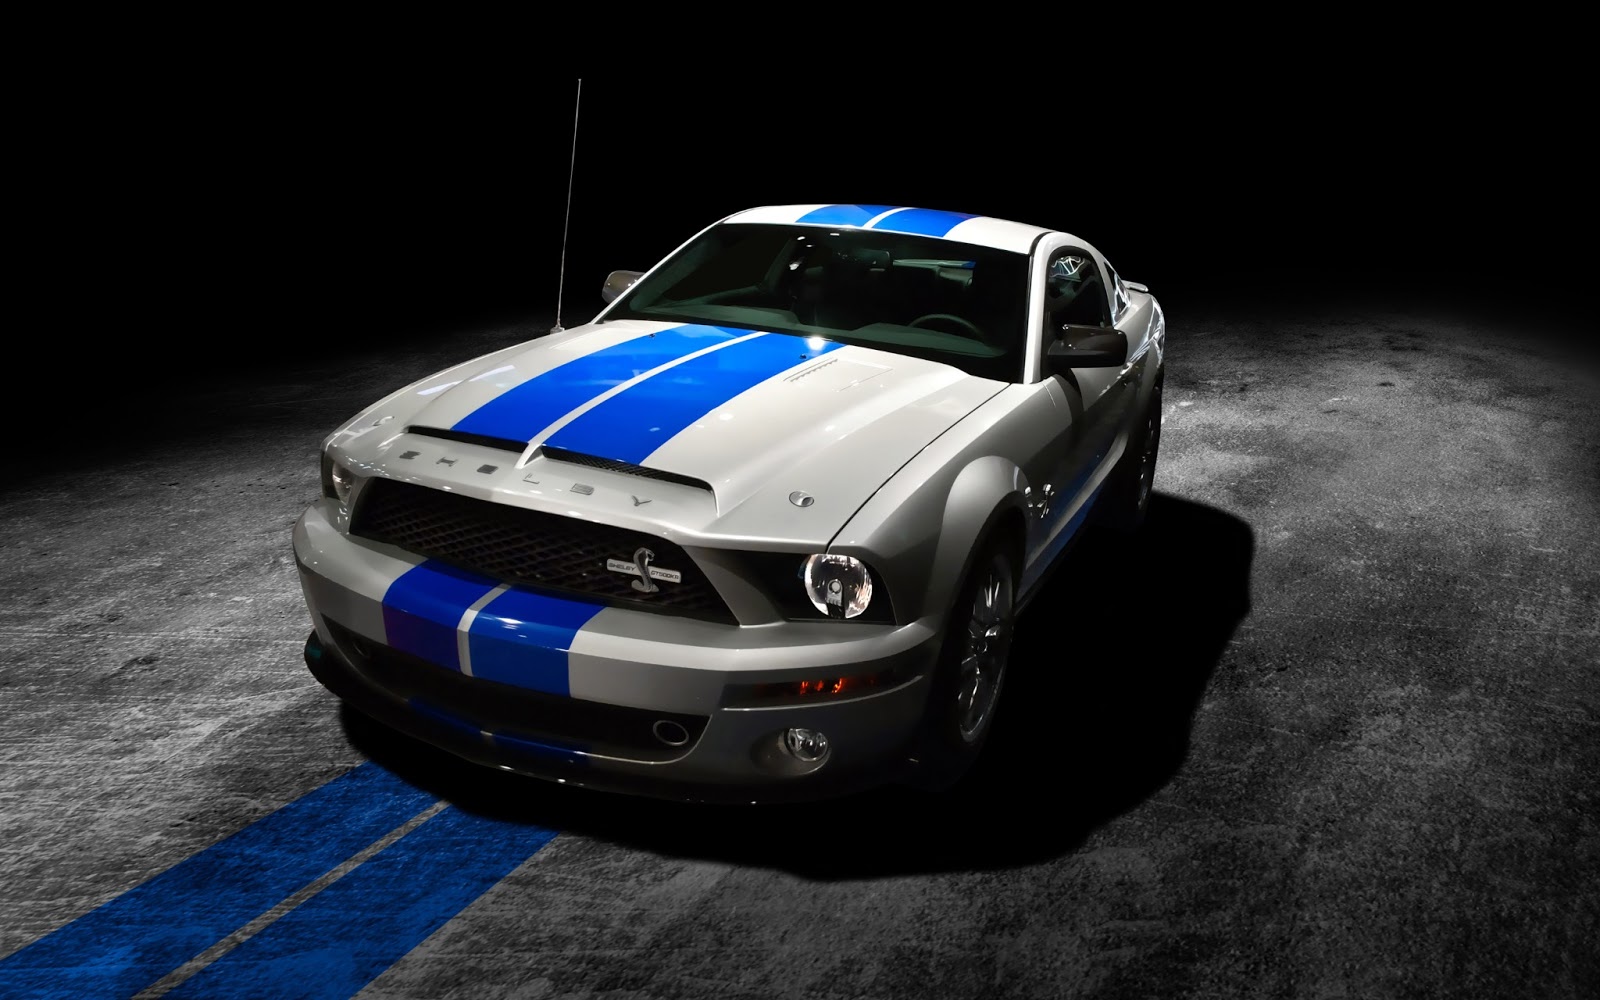 Wallpapers World Cars Wallpapers Full HD 1080p 199 1600x1000